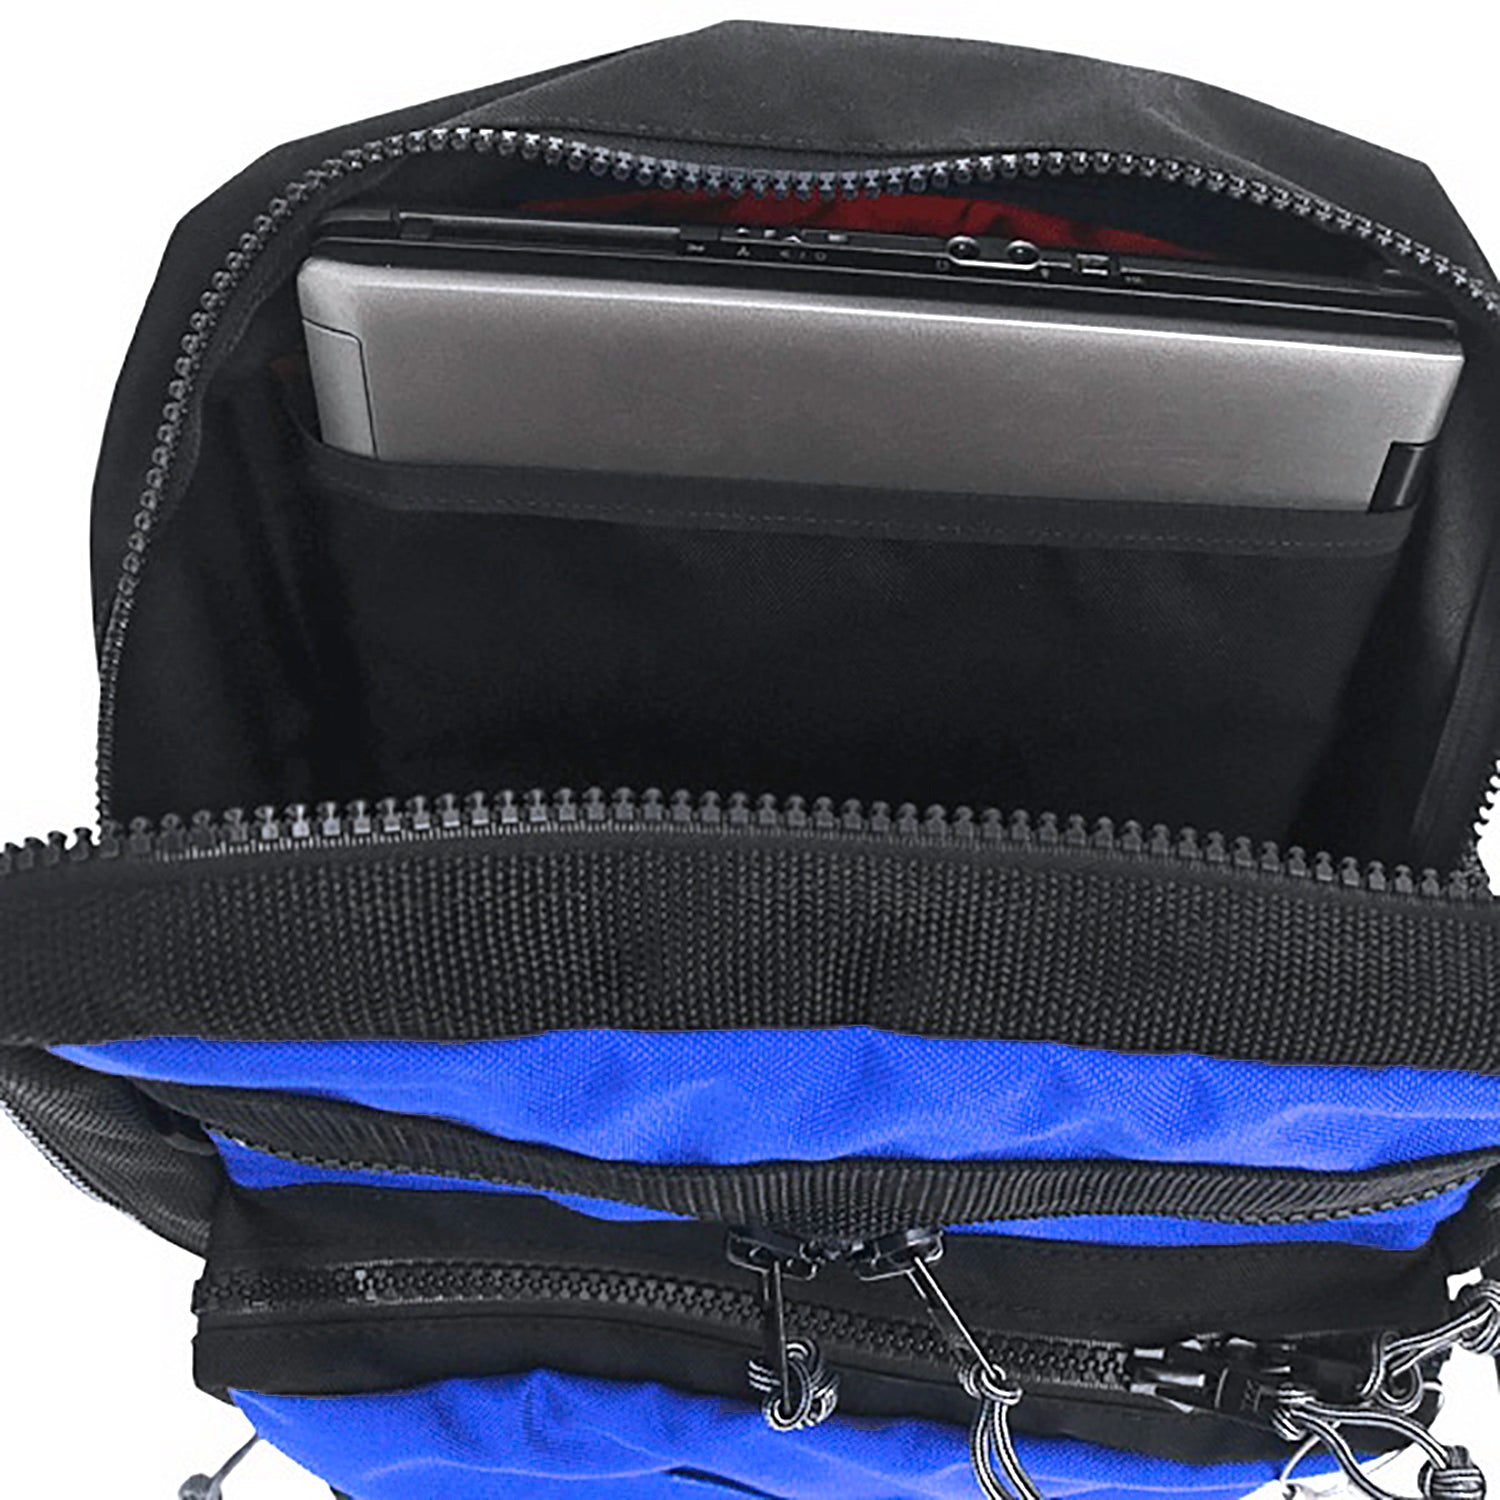 Interior with laptop in sleeve. 